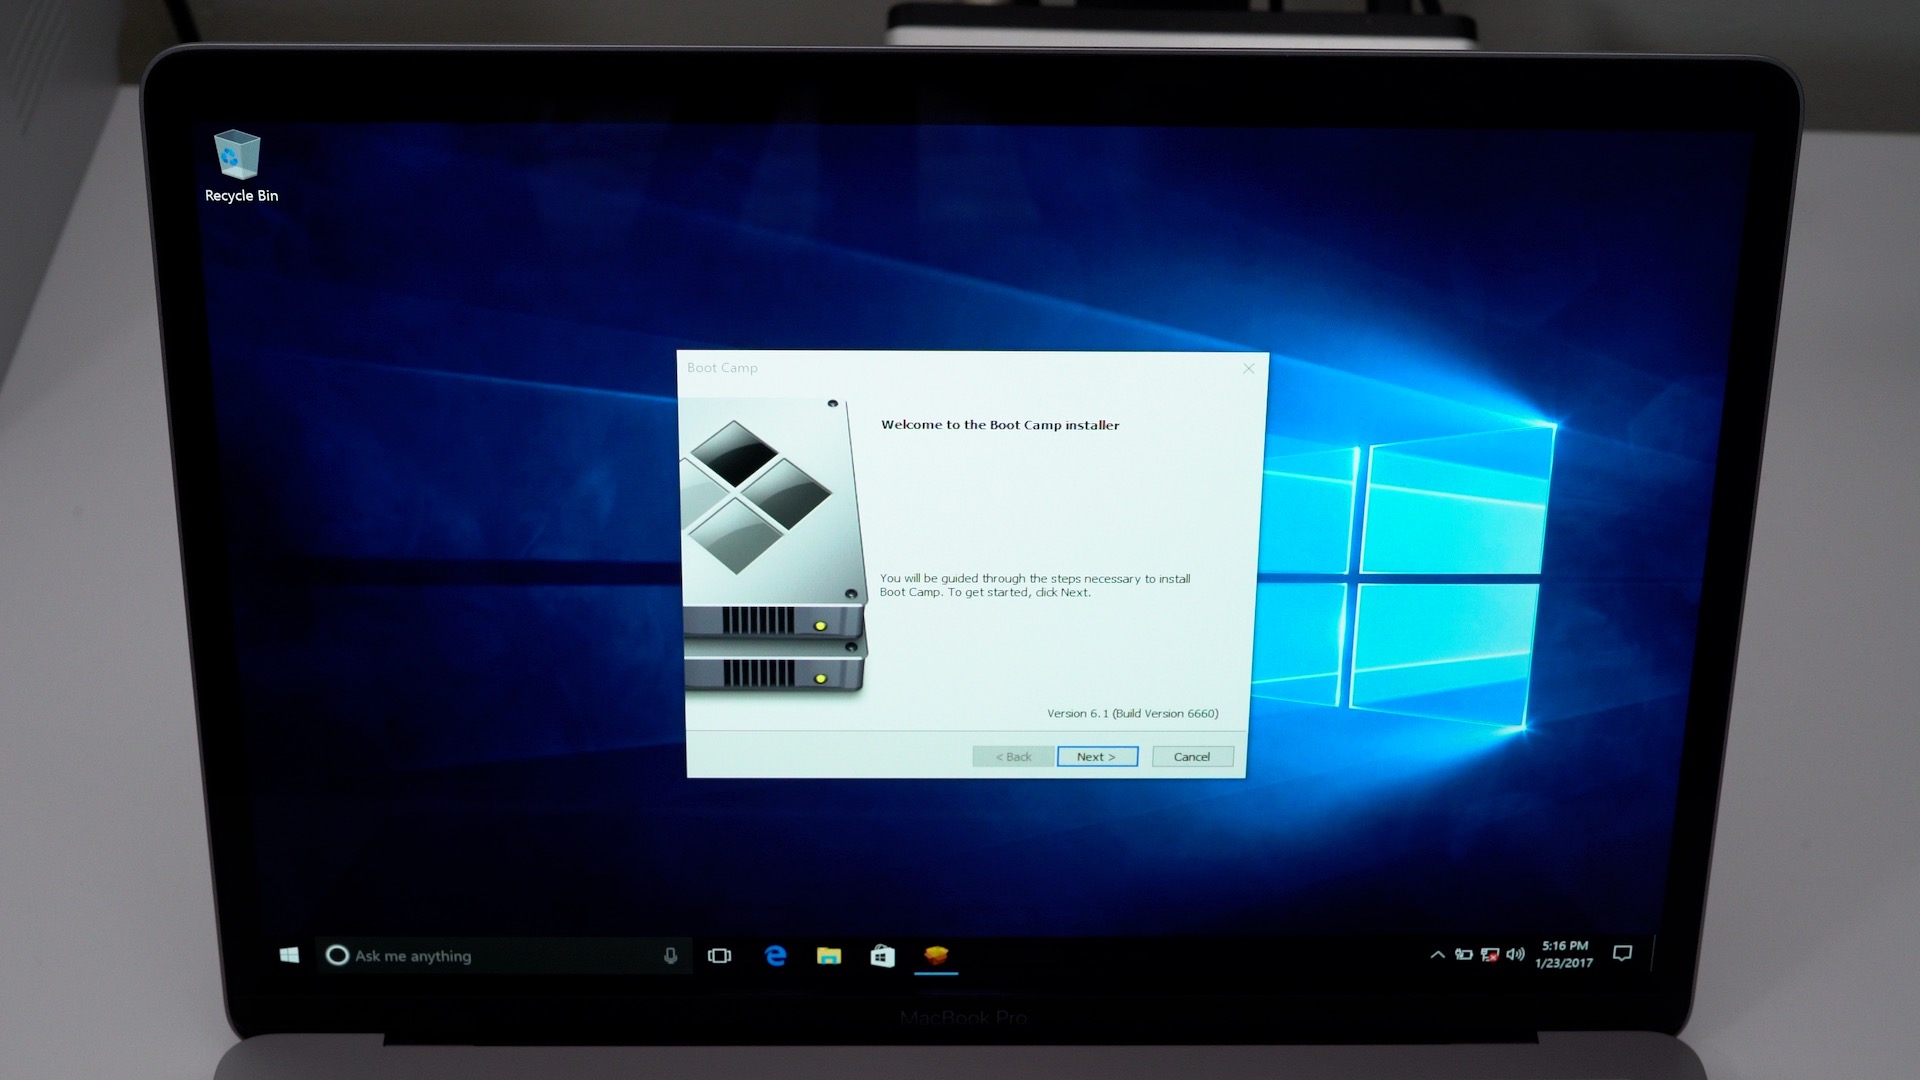 How to install Windows 8 on your Mac using Boot Camp Assistant